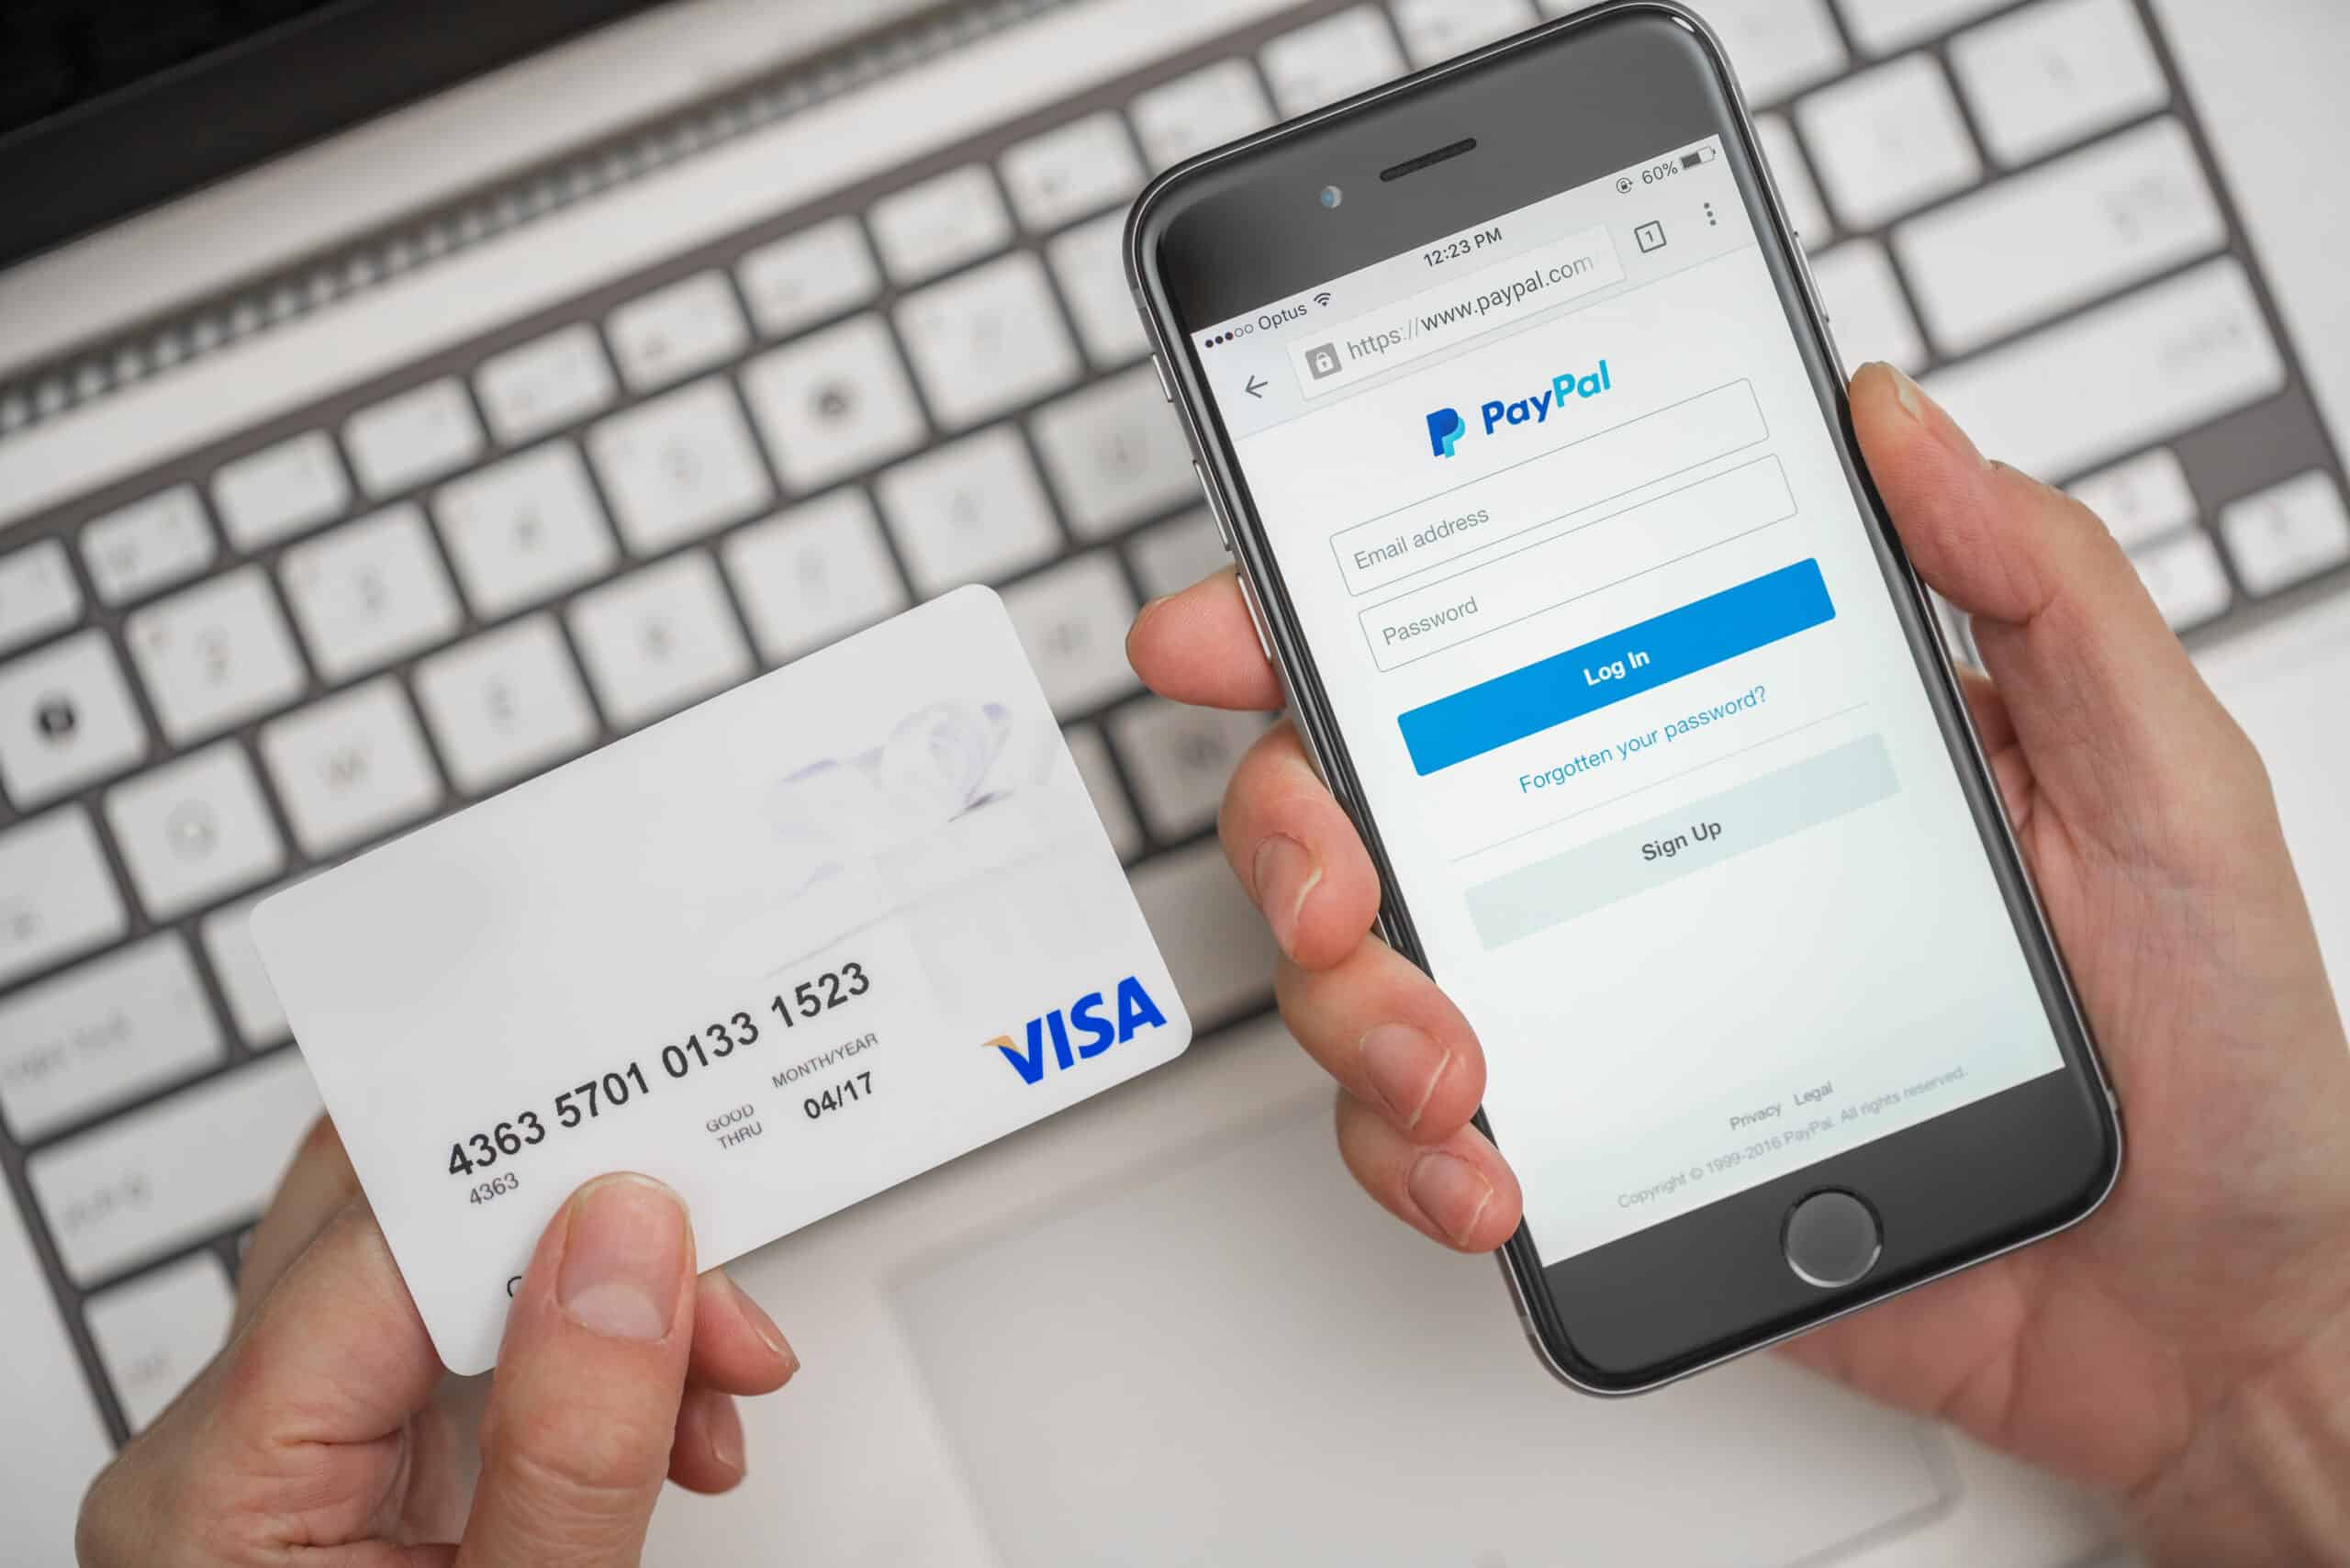 how-to-sign-up-on-paypal-without-a-phone-number